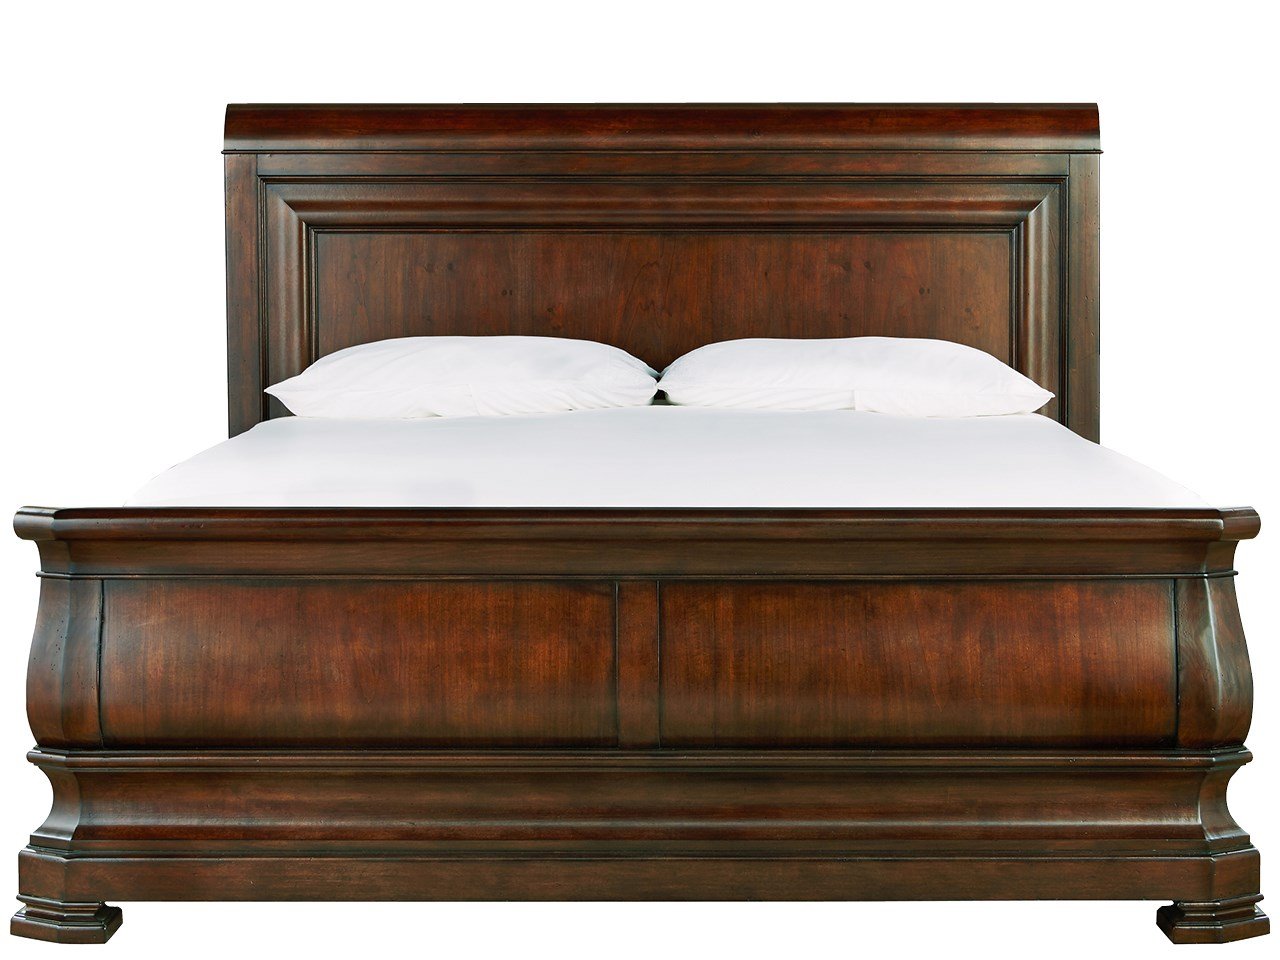 Reprise King Sleigh Bed Universal, Wooden Sleigh King Bed Frame